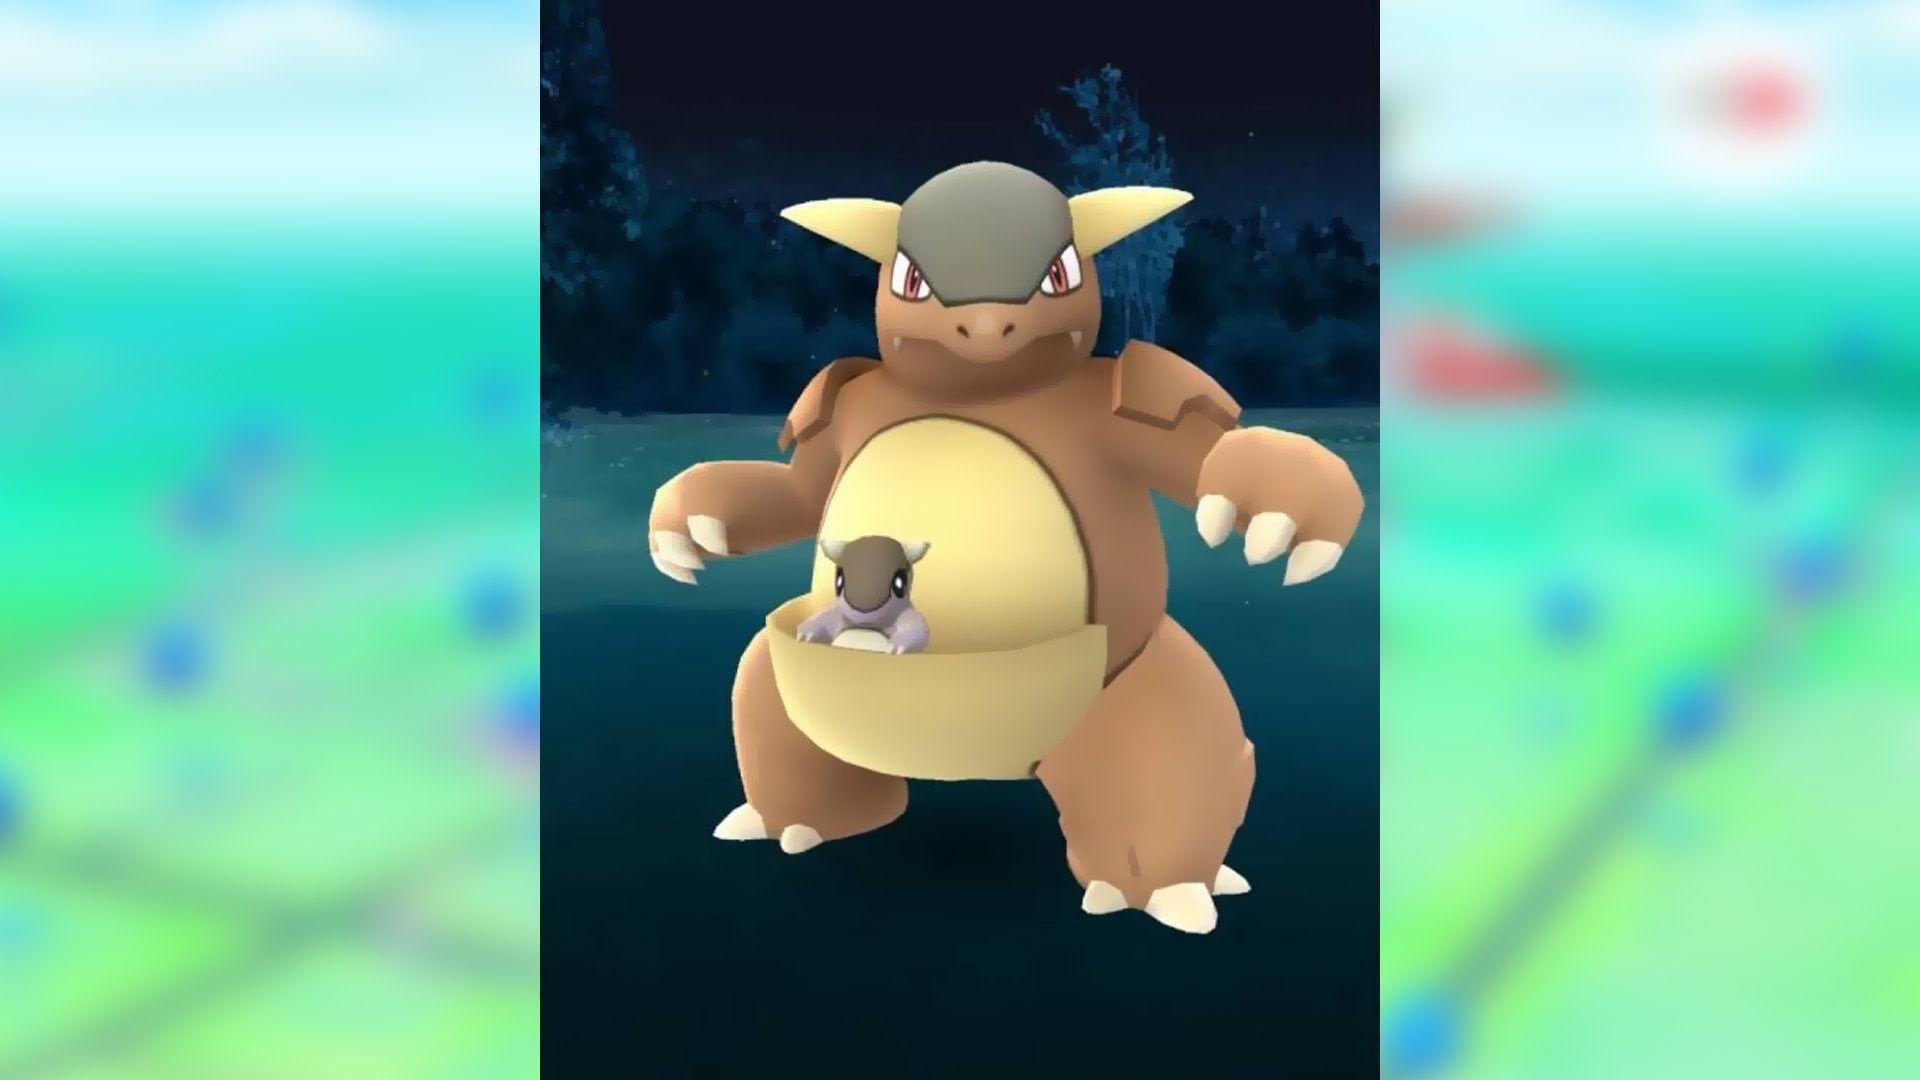 Kangaskhan available in Pokémon GO during World Championship